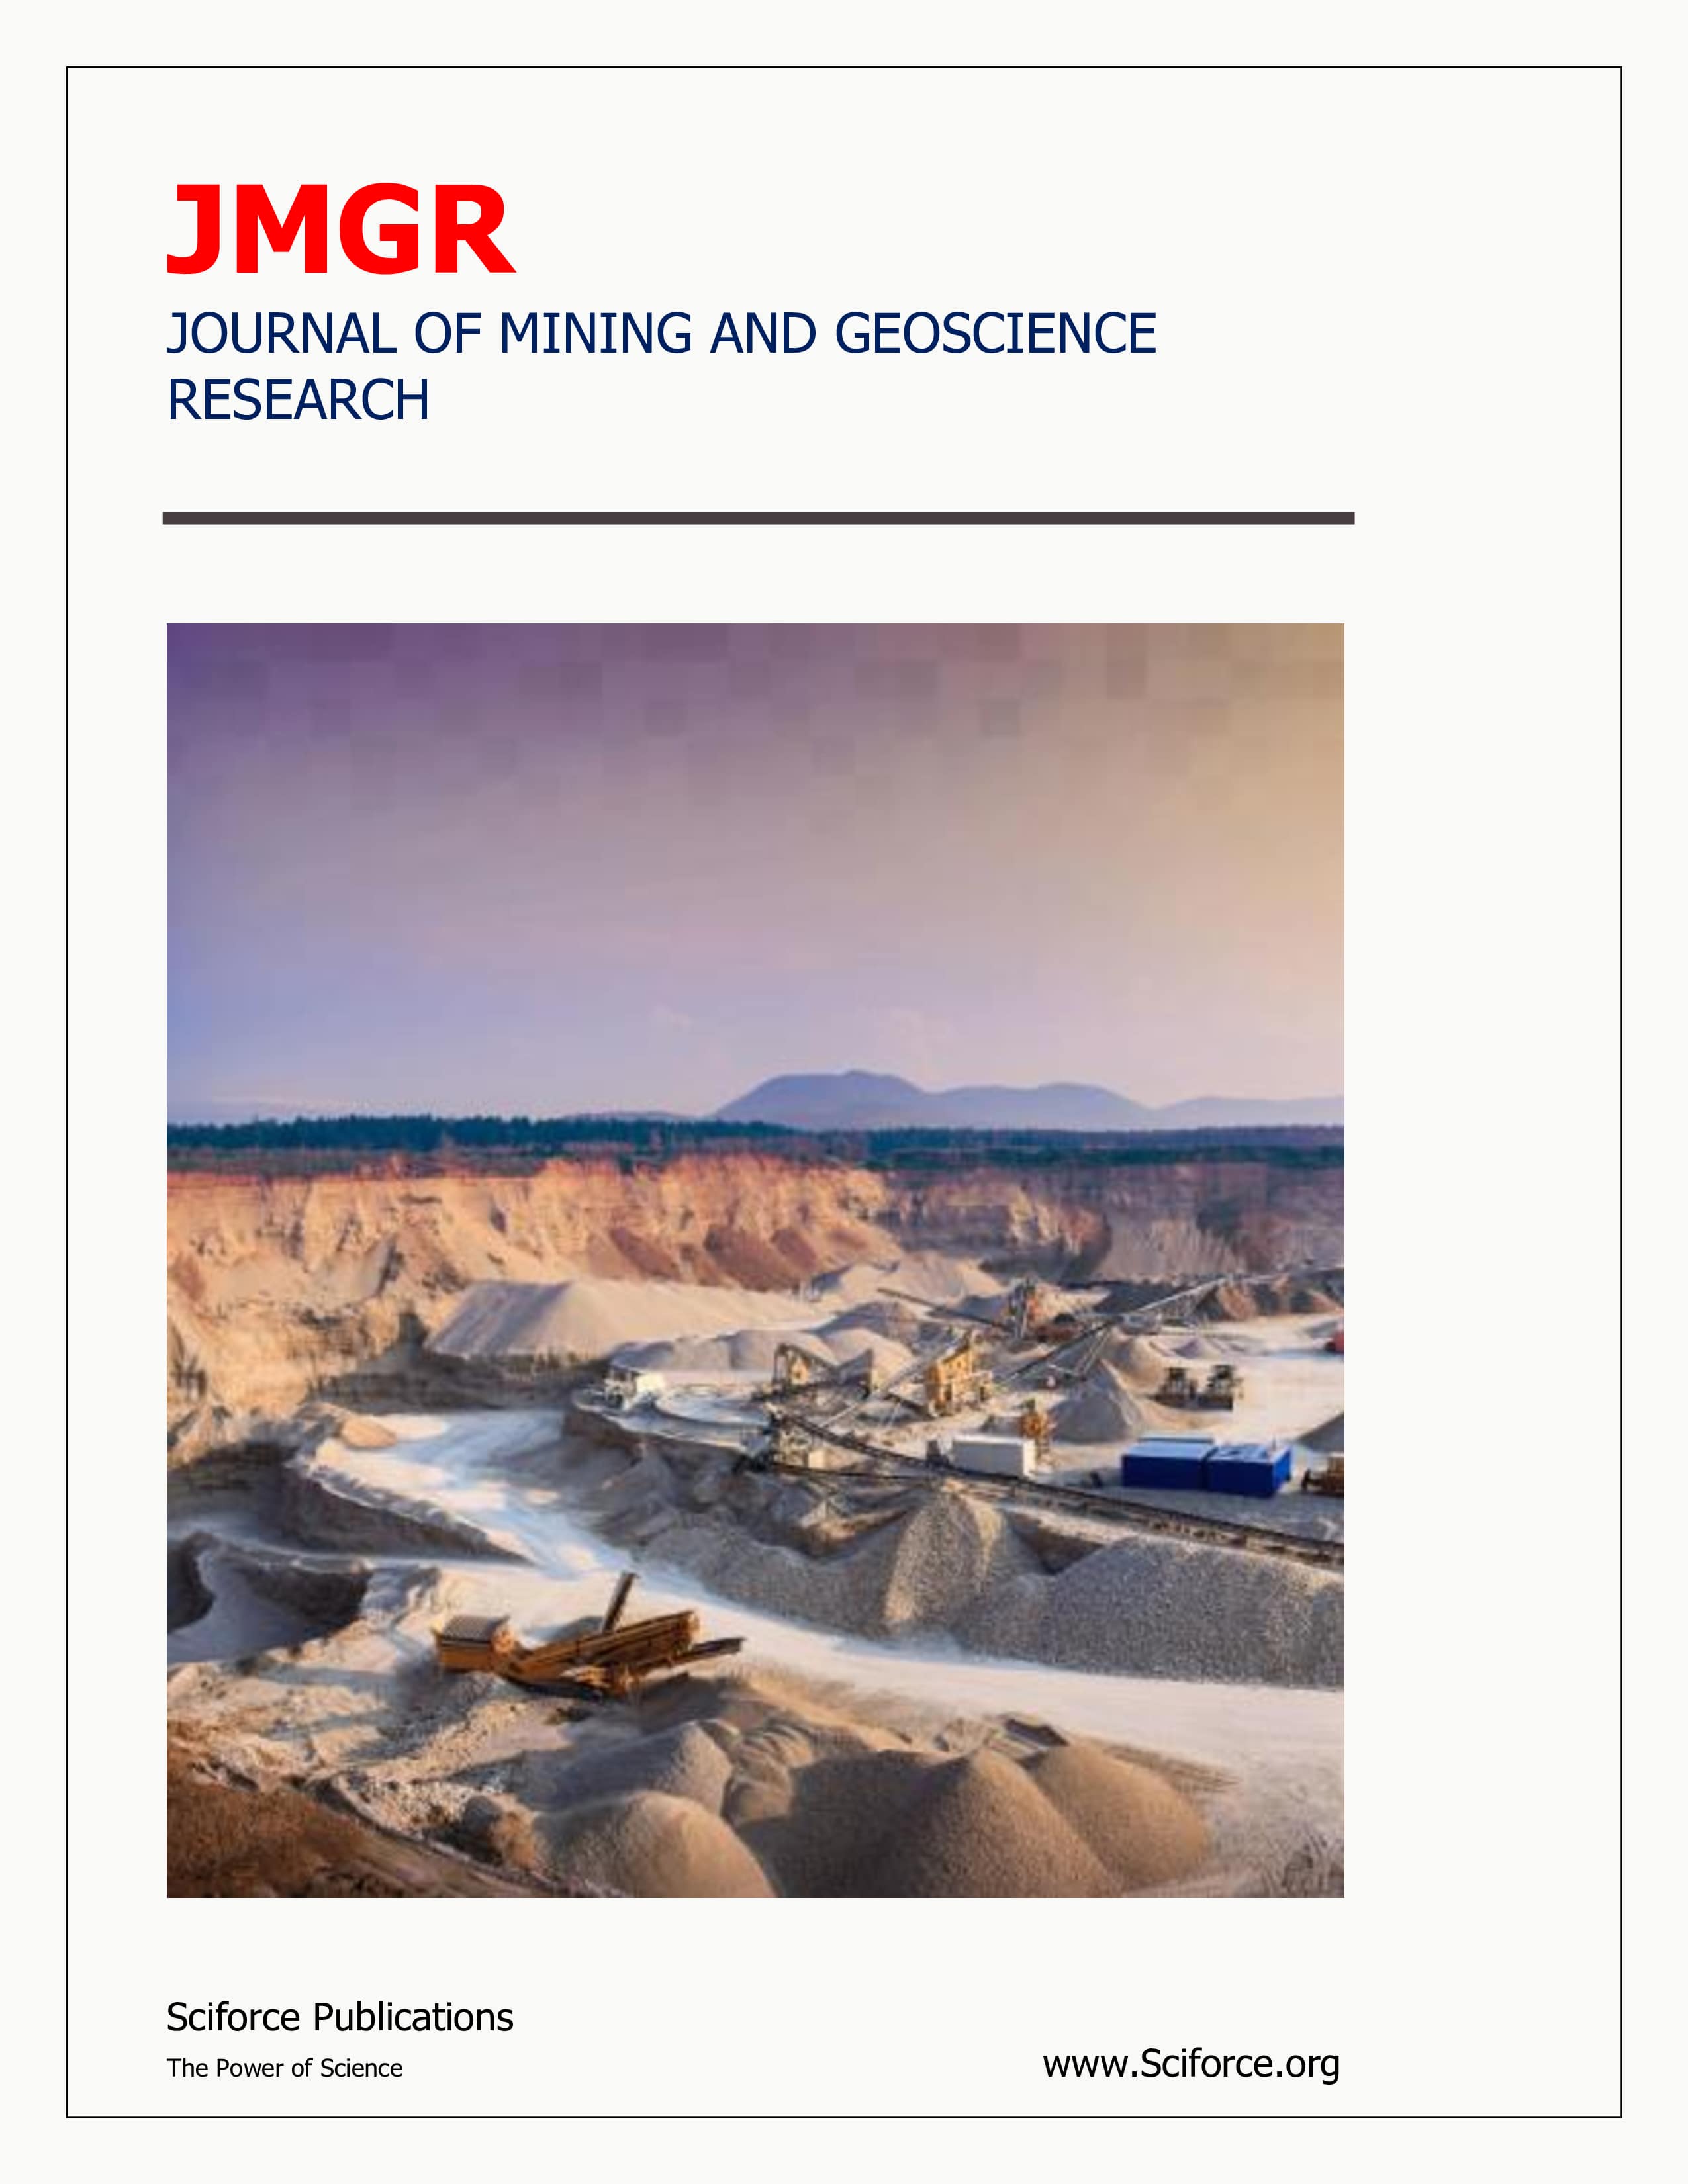 Journal of Mining and Geoscience Research